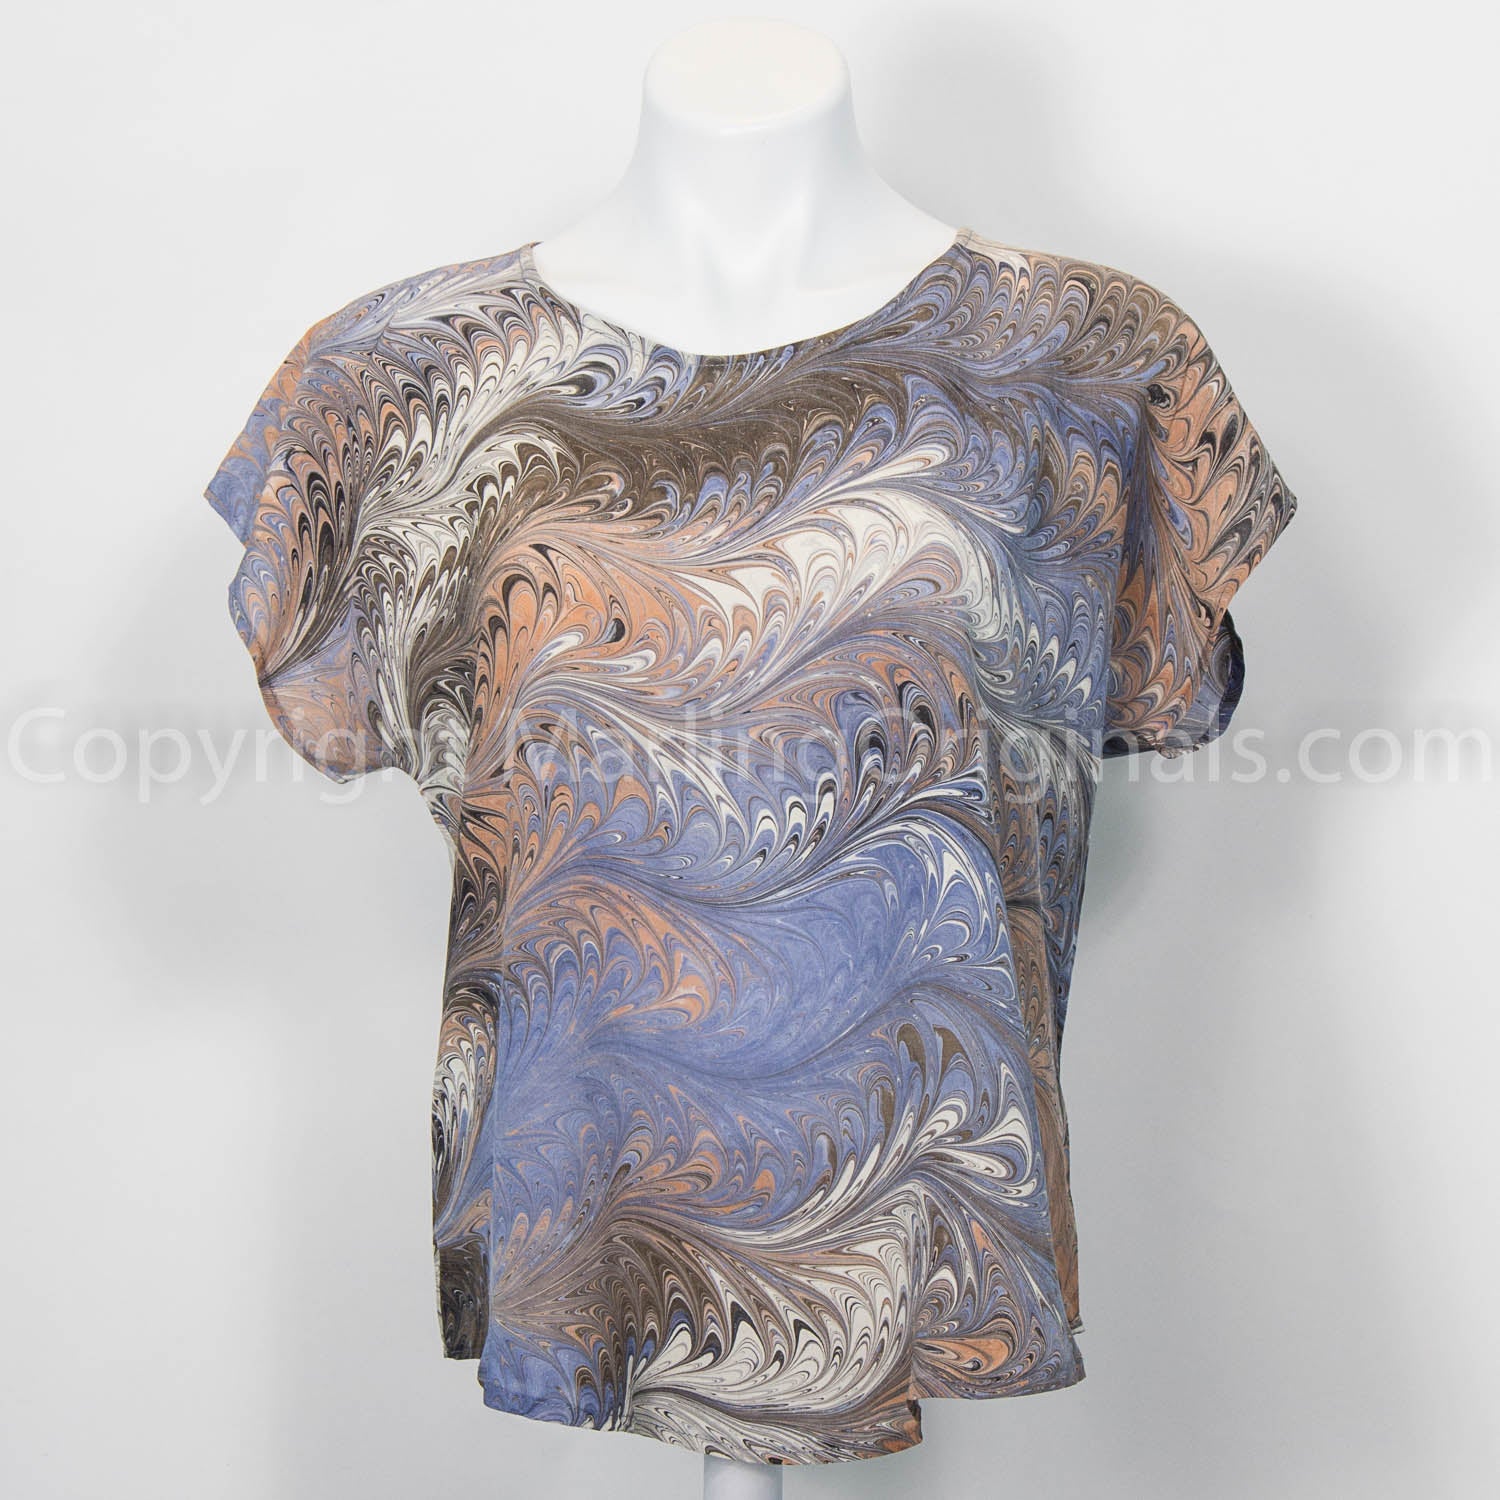 marbled silk crepe top in brown, blue gray, with black and cream